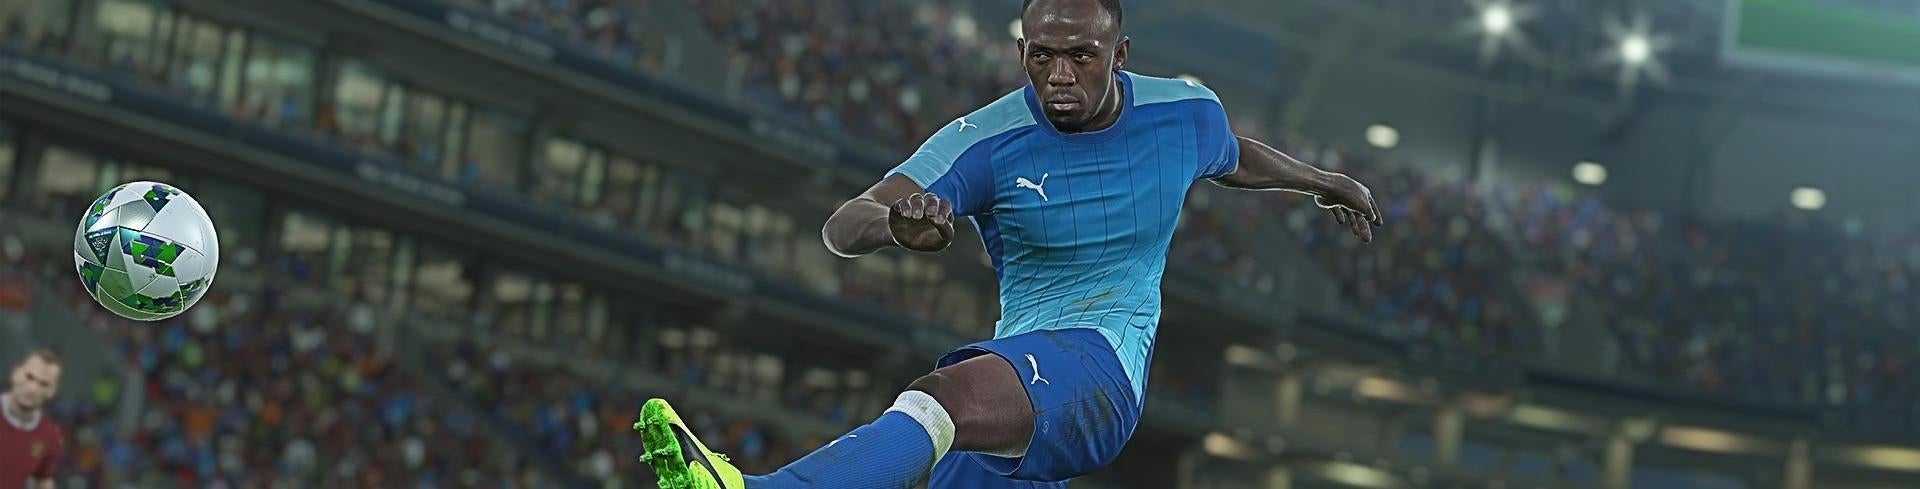 Image for PES 2018 proves that slower can be better